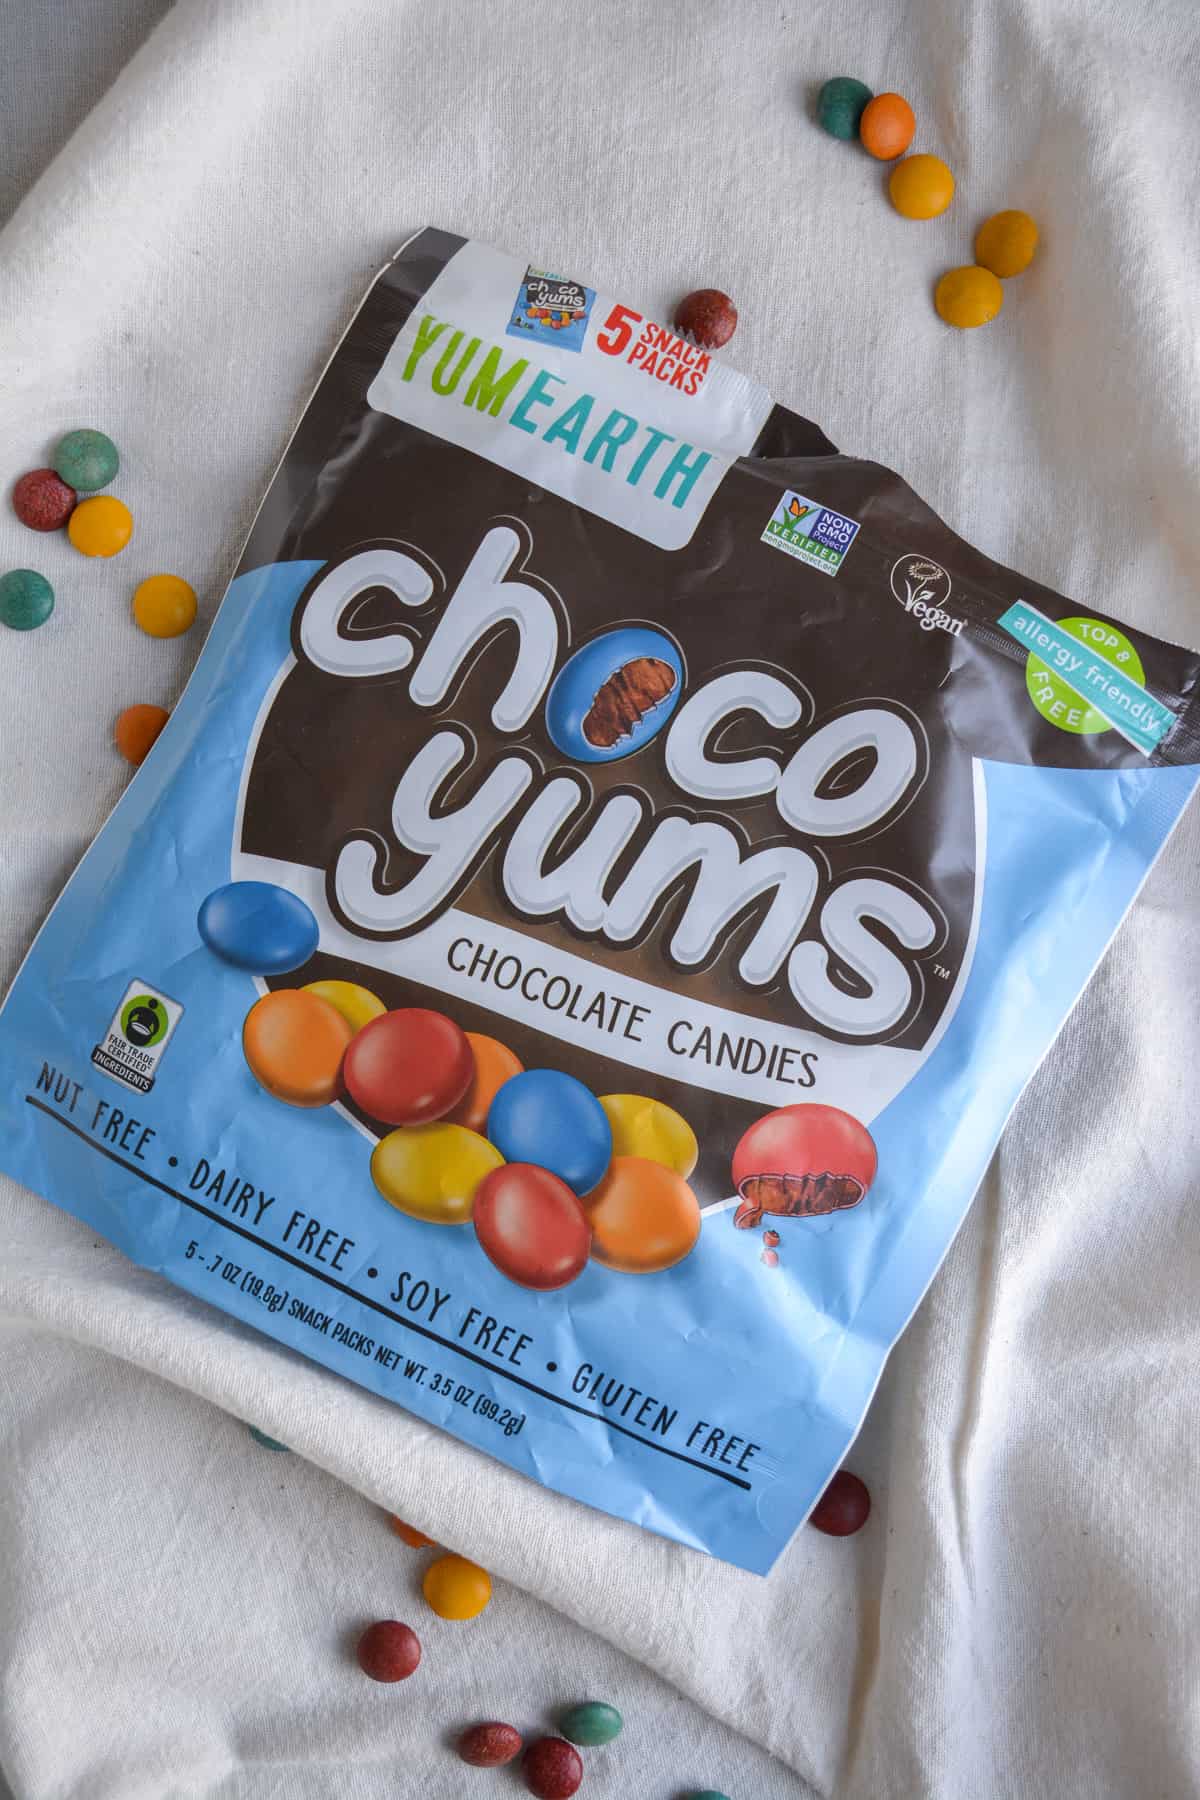 A package of Yum Earth Choco Yums